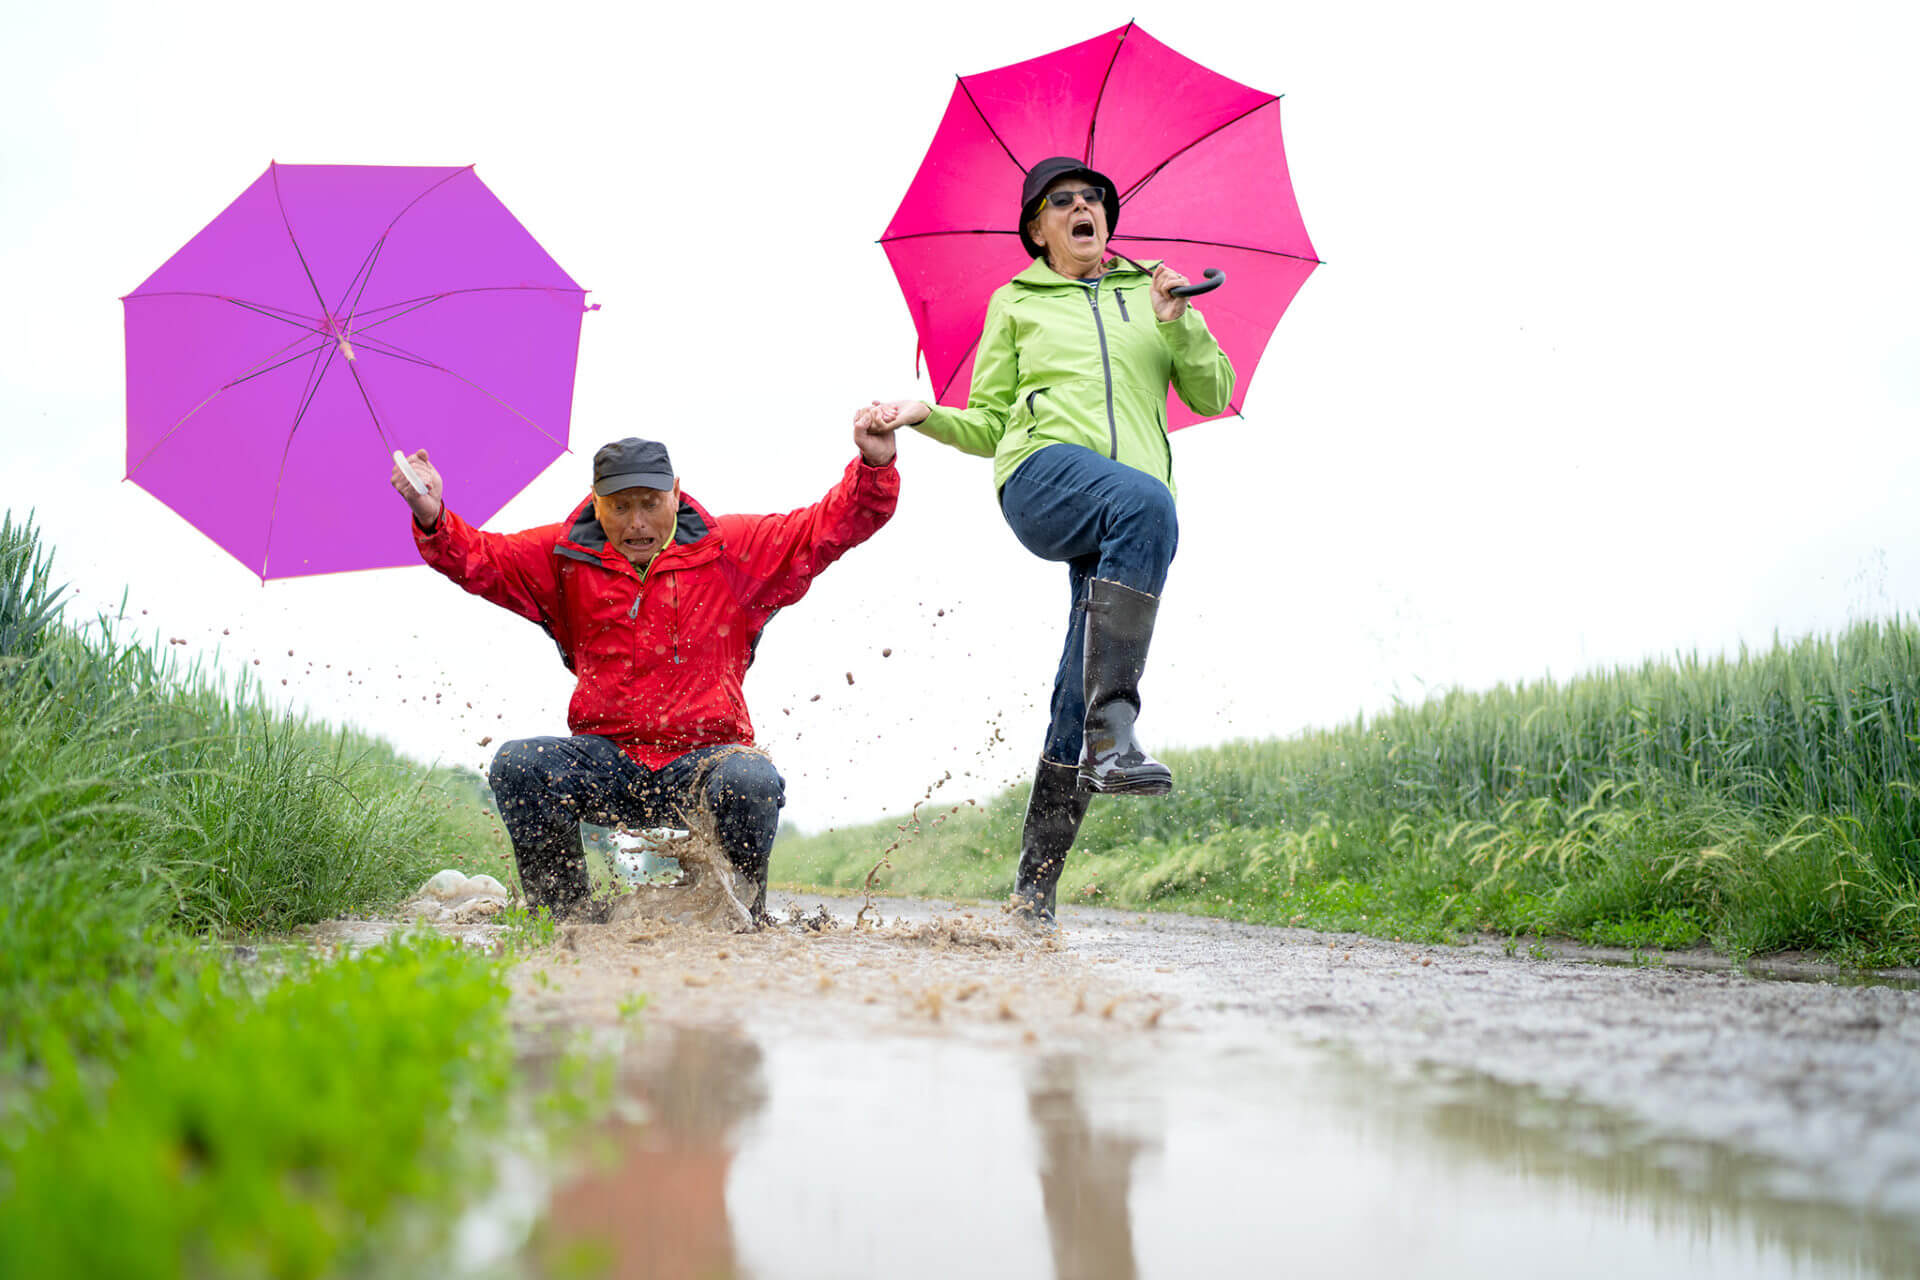 funny active 70 years old senior couple hand in hand on path through rural landscape on bad weathers day, man jumping in dirty rain puddle